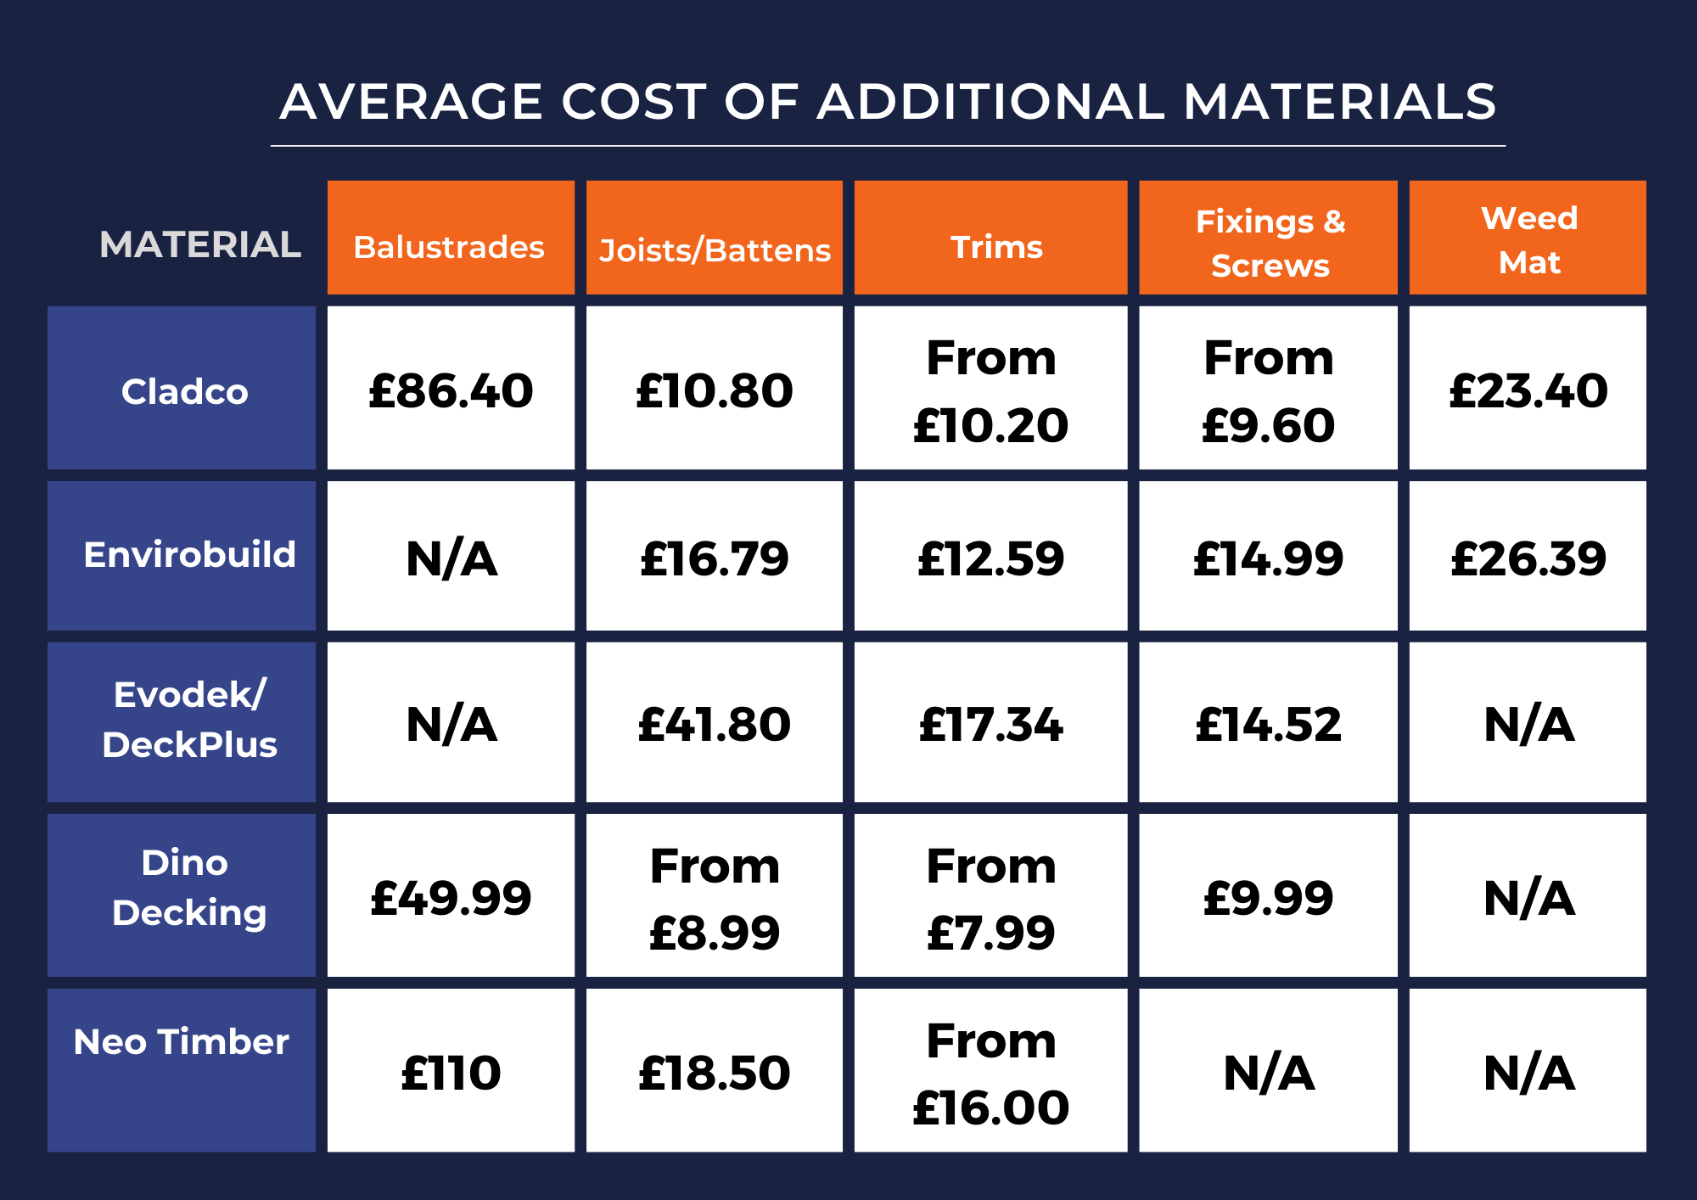 Average cost of additional materials